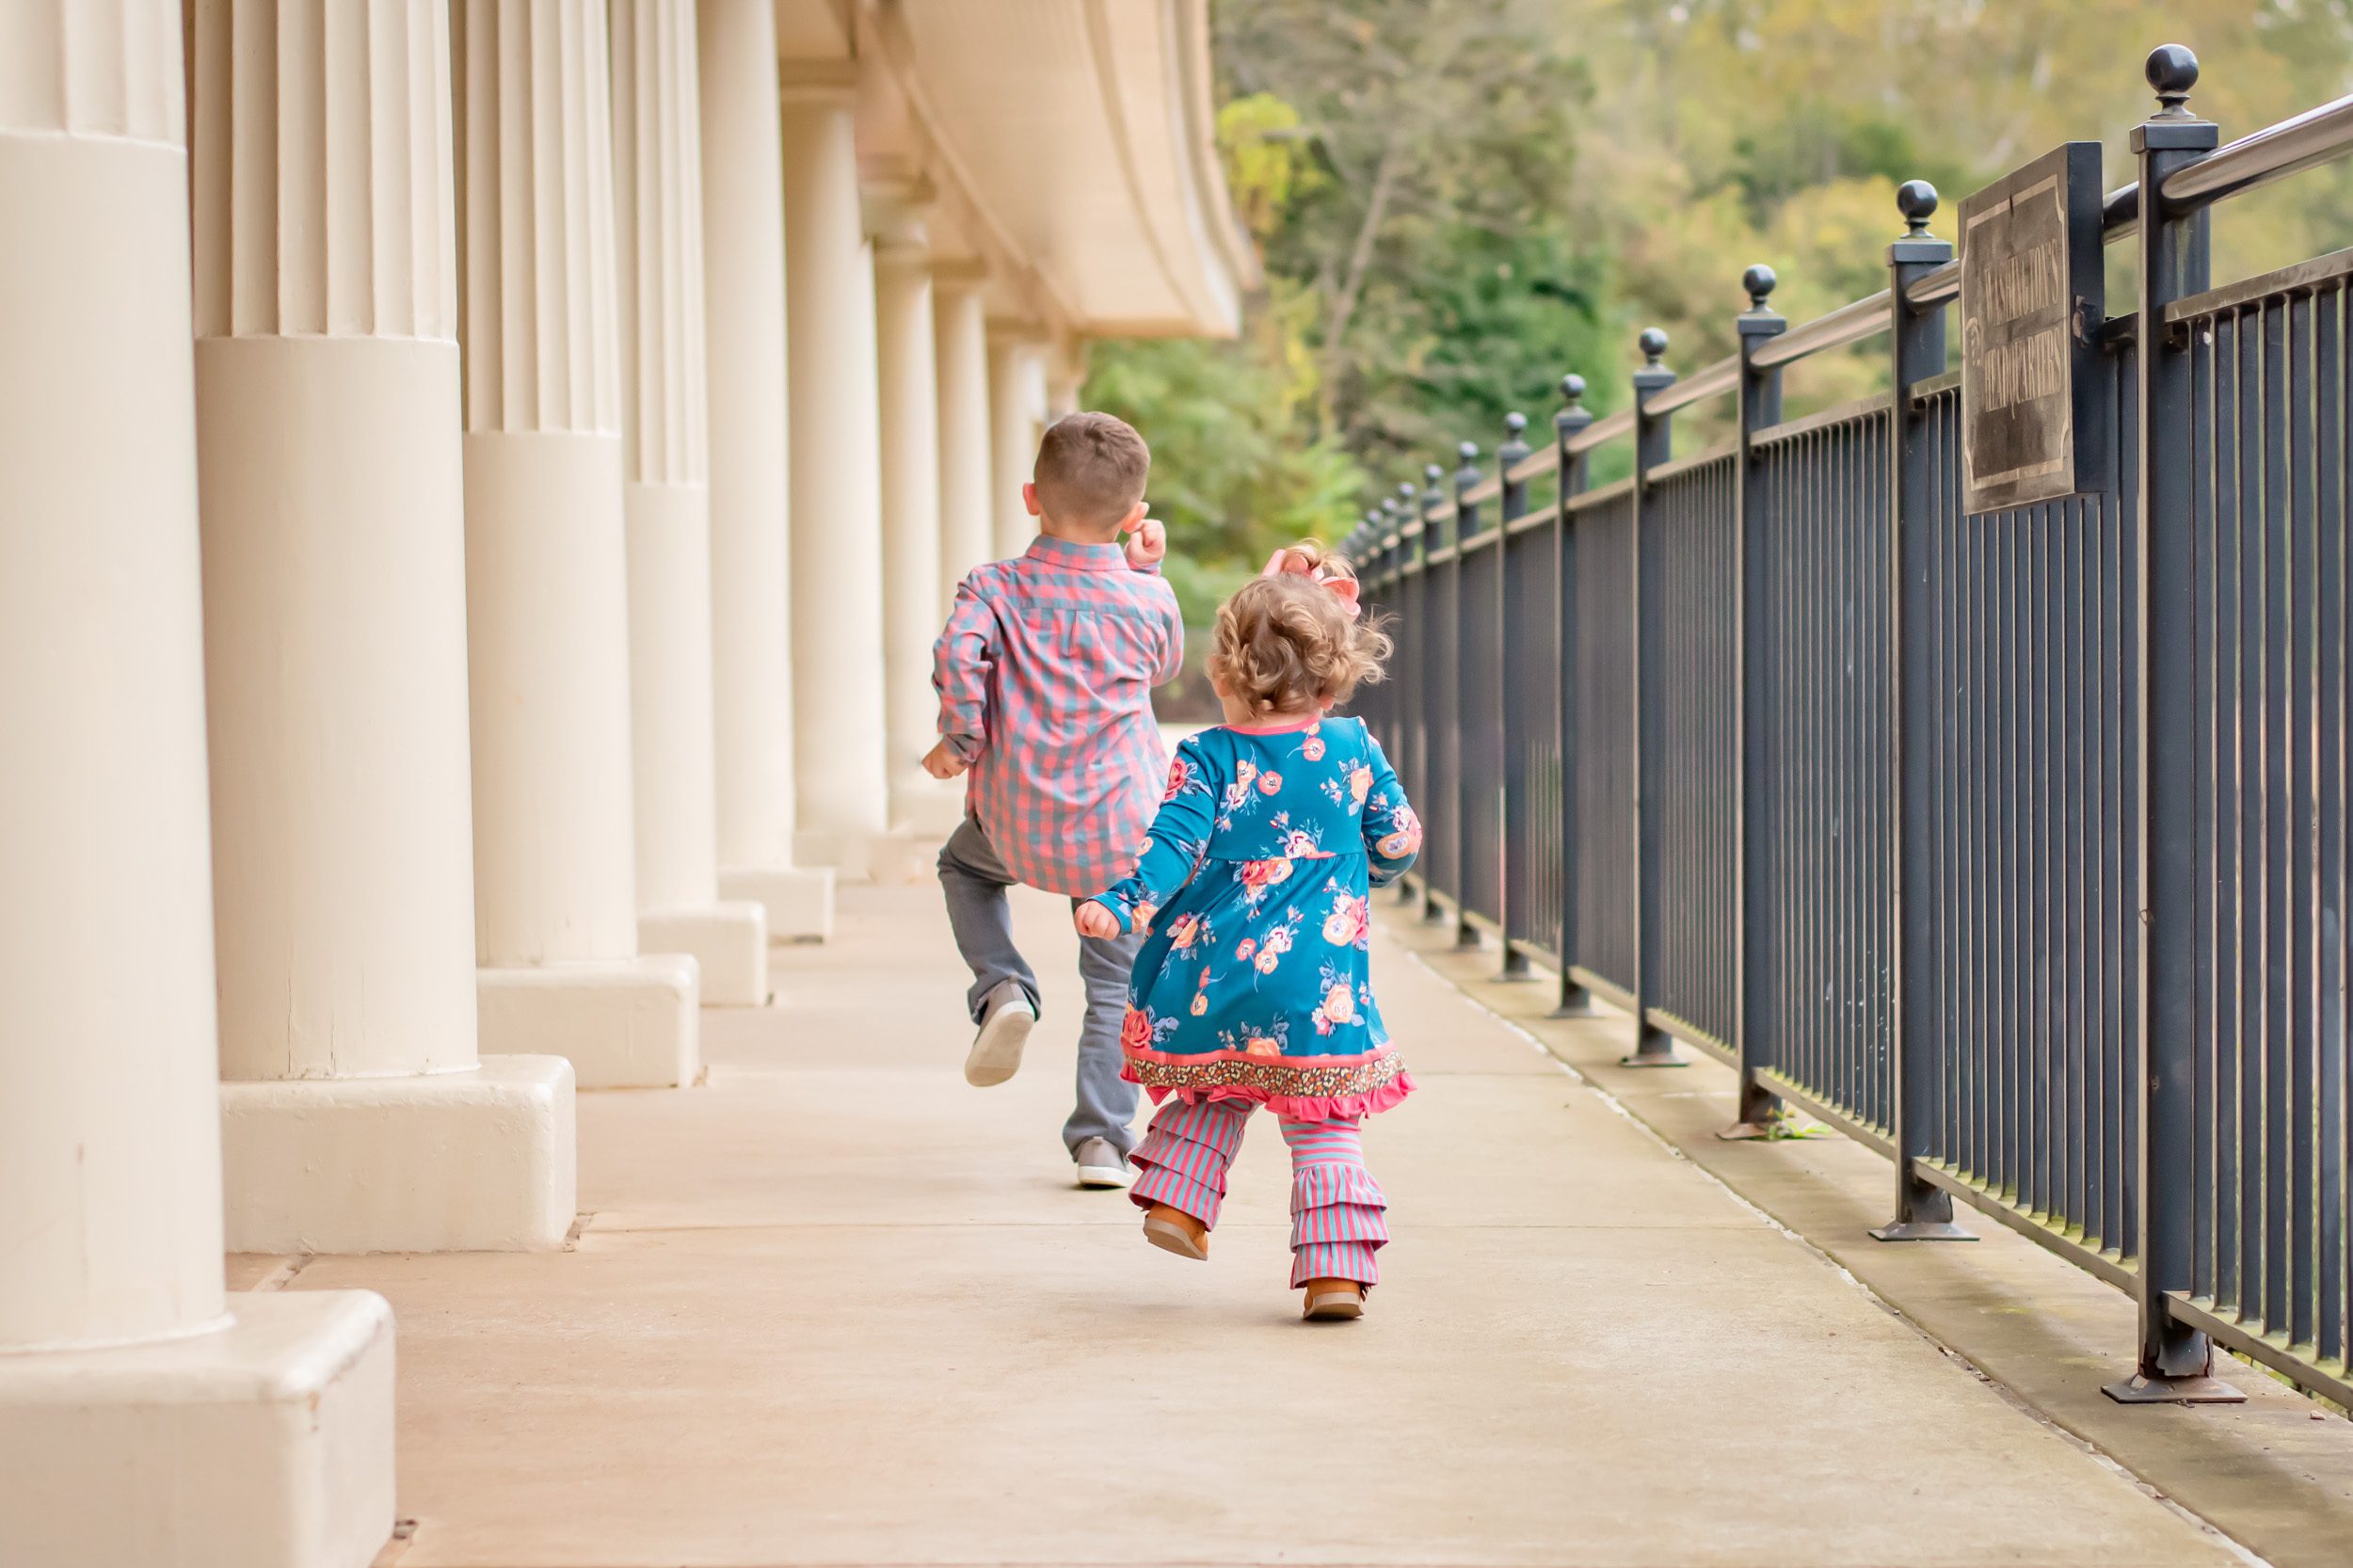 Family photo of two young siblings marching away from the camera in unison along a train station platform